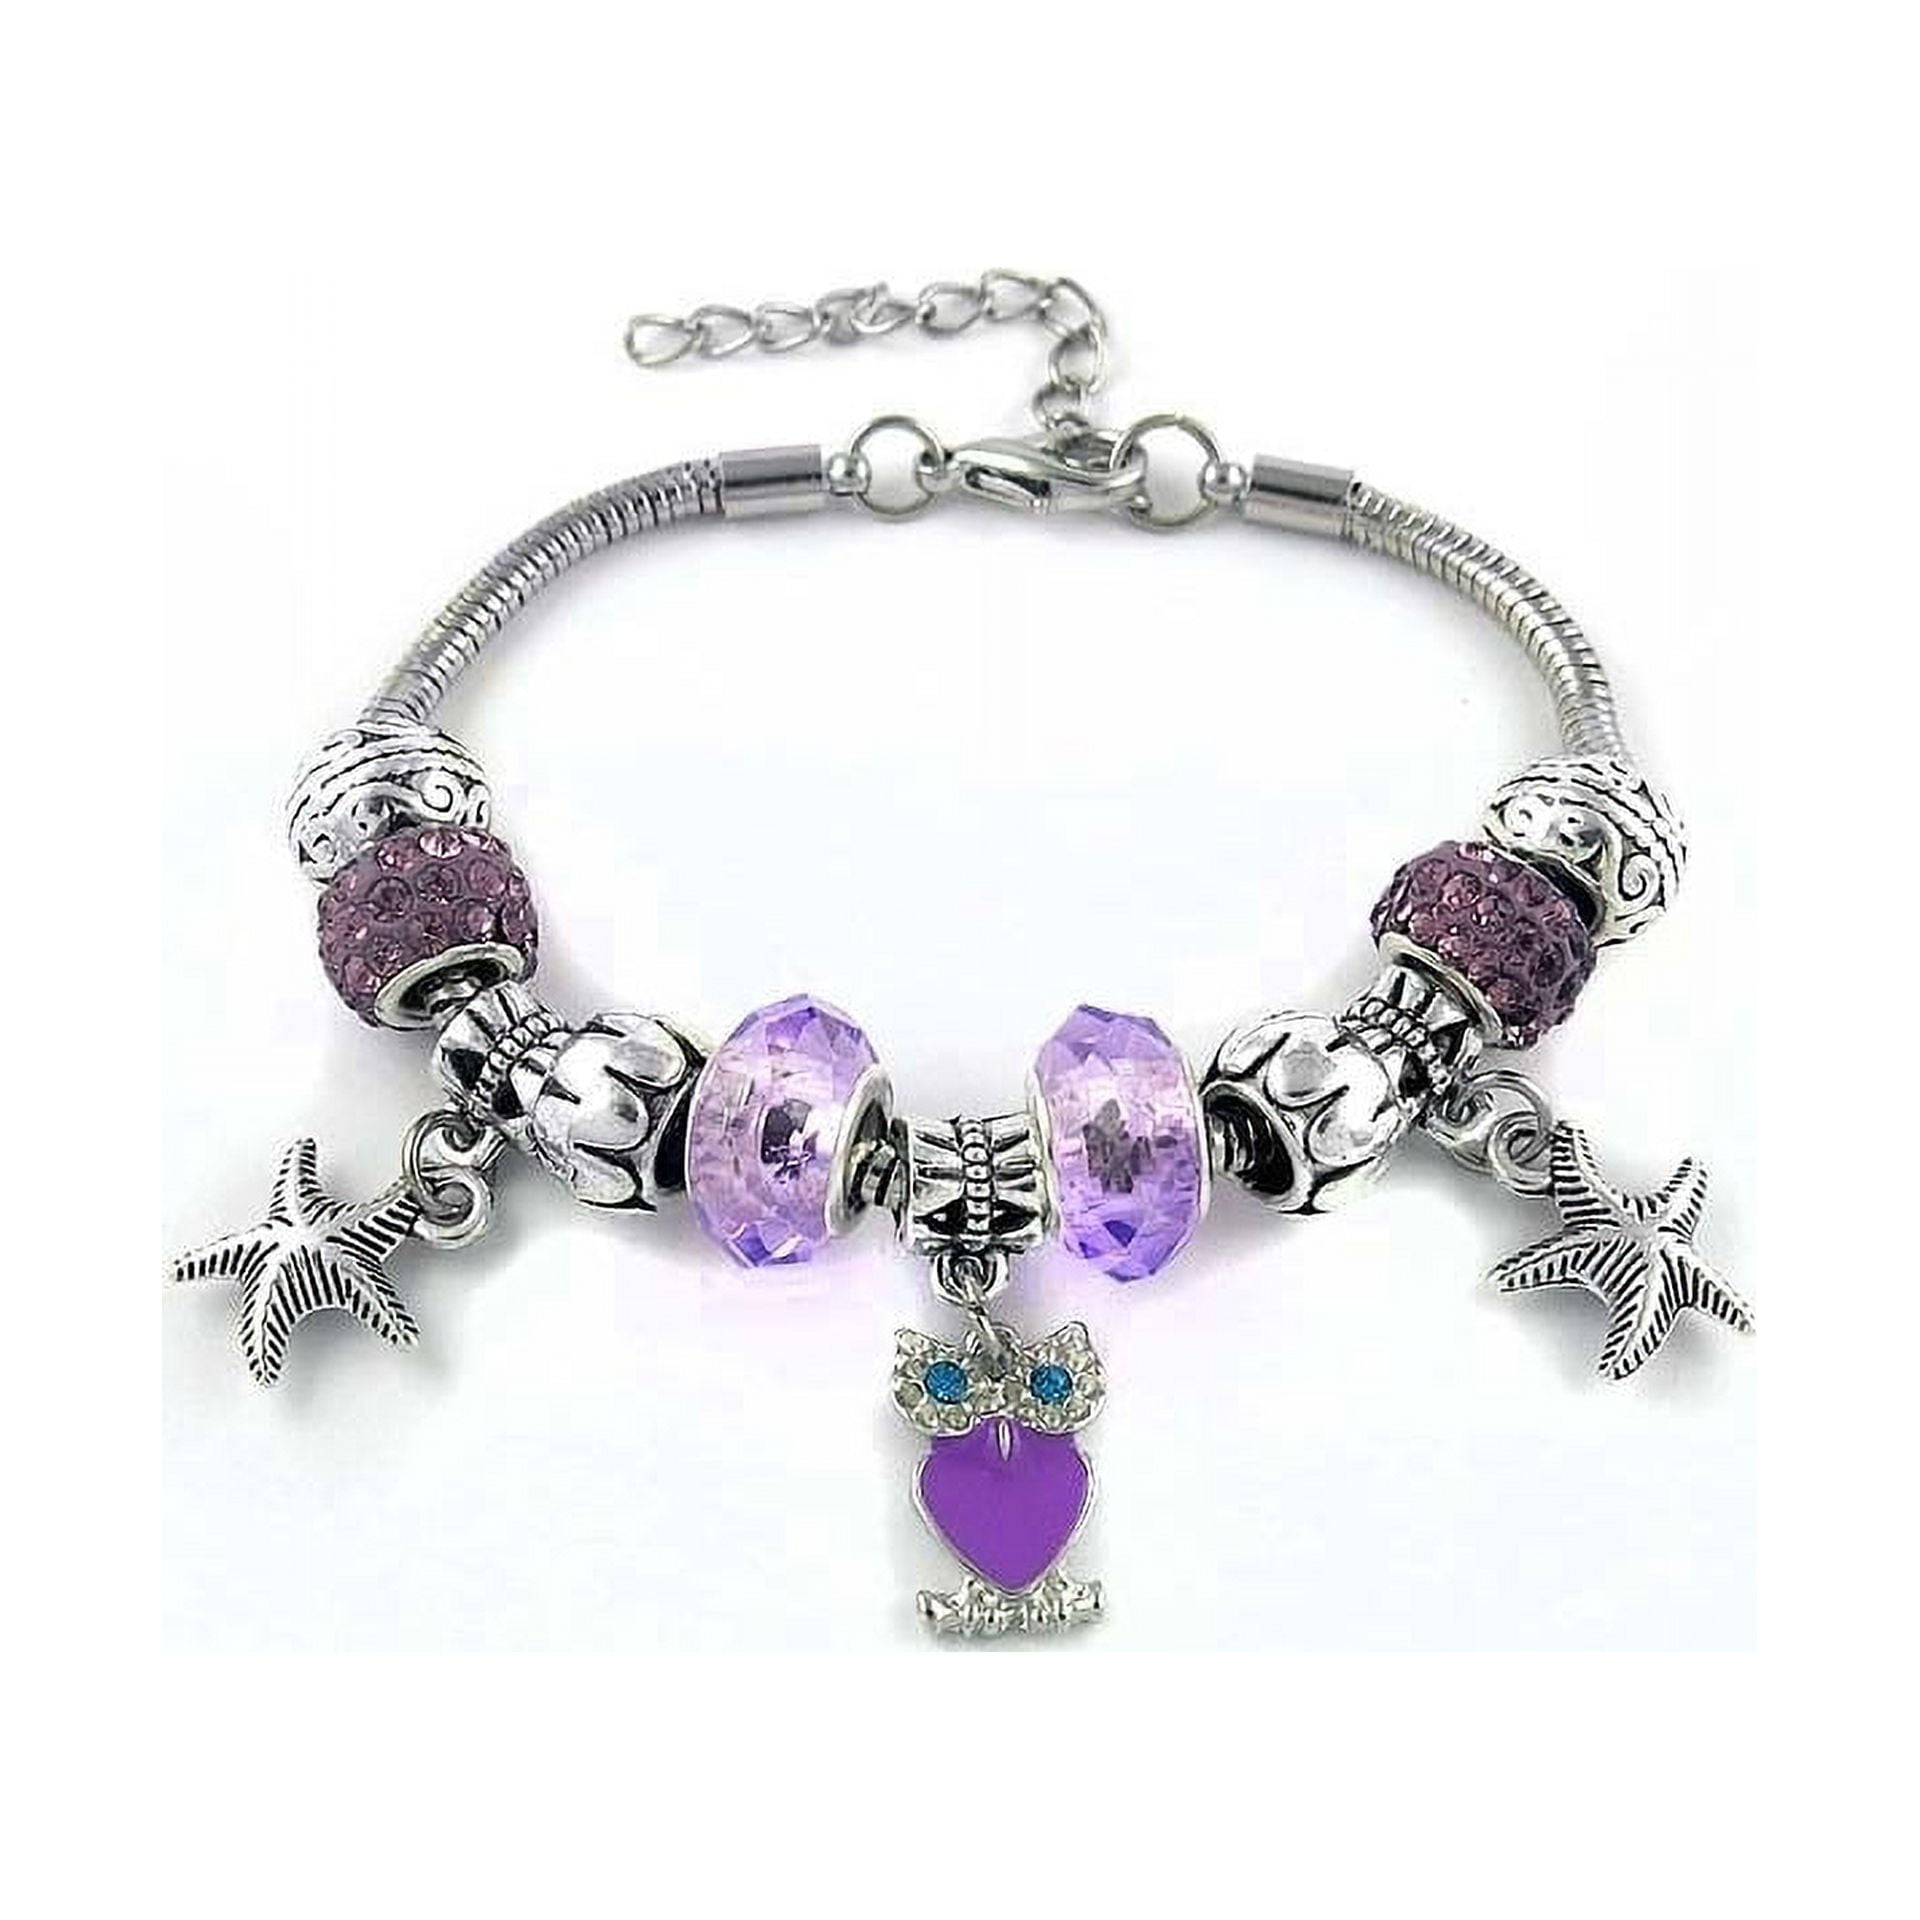 Pink Muranno Charm Bracelet with Crystals from Swarovski